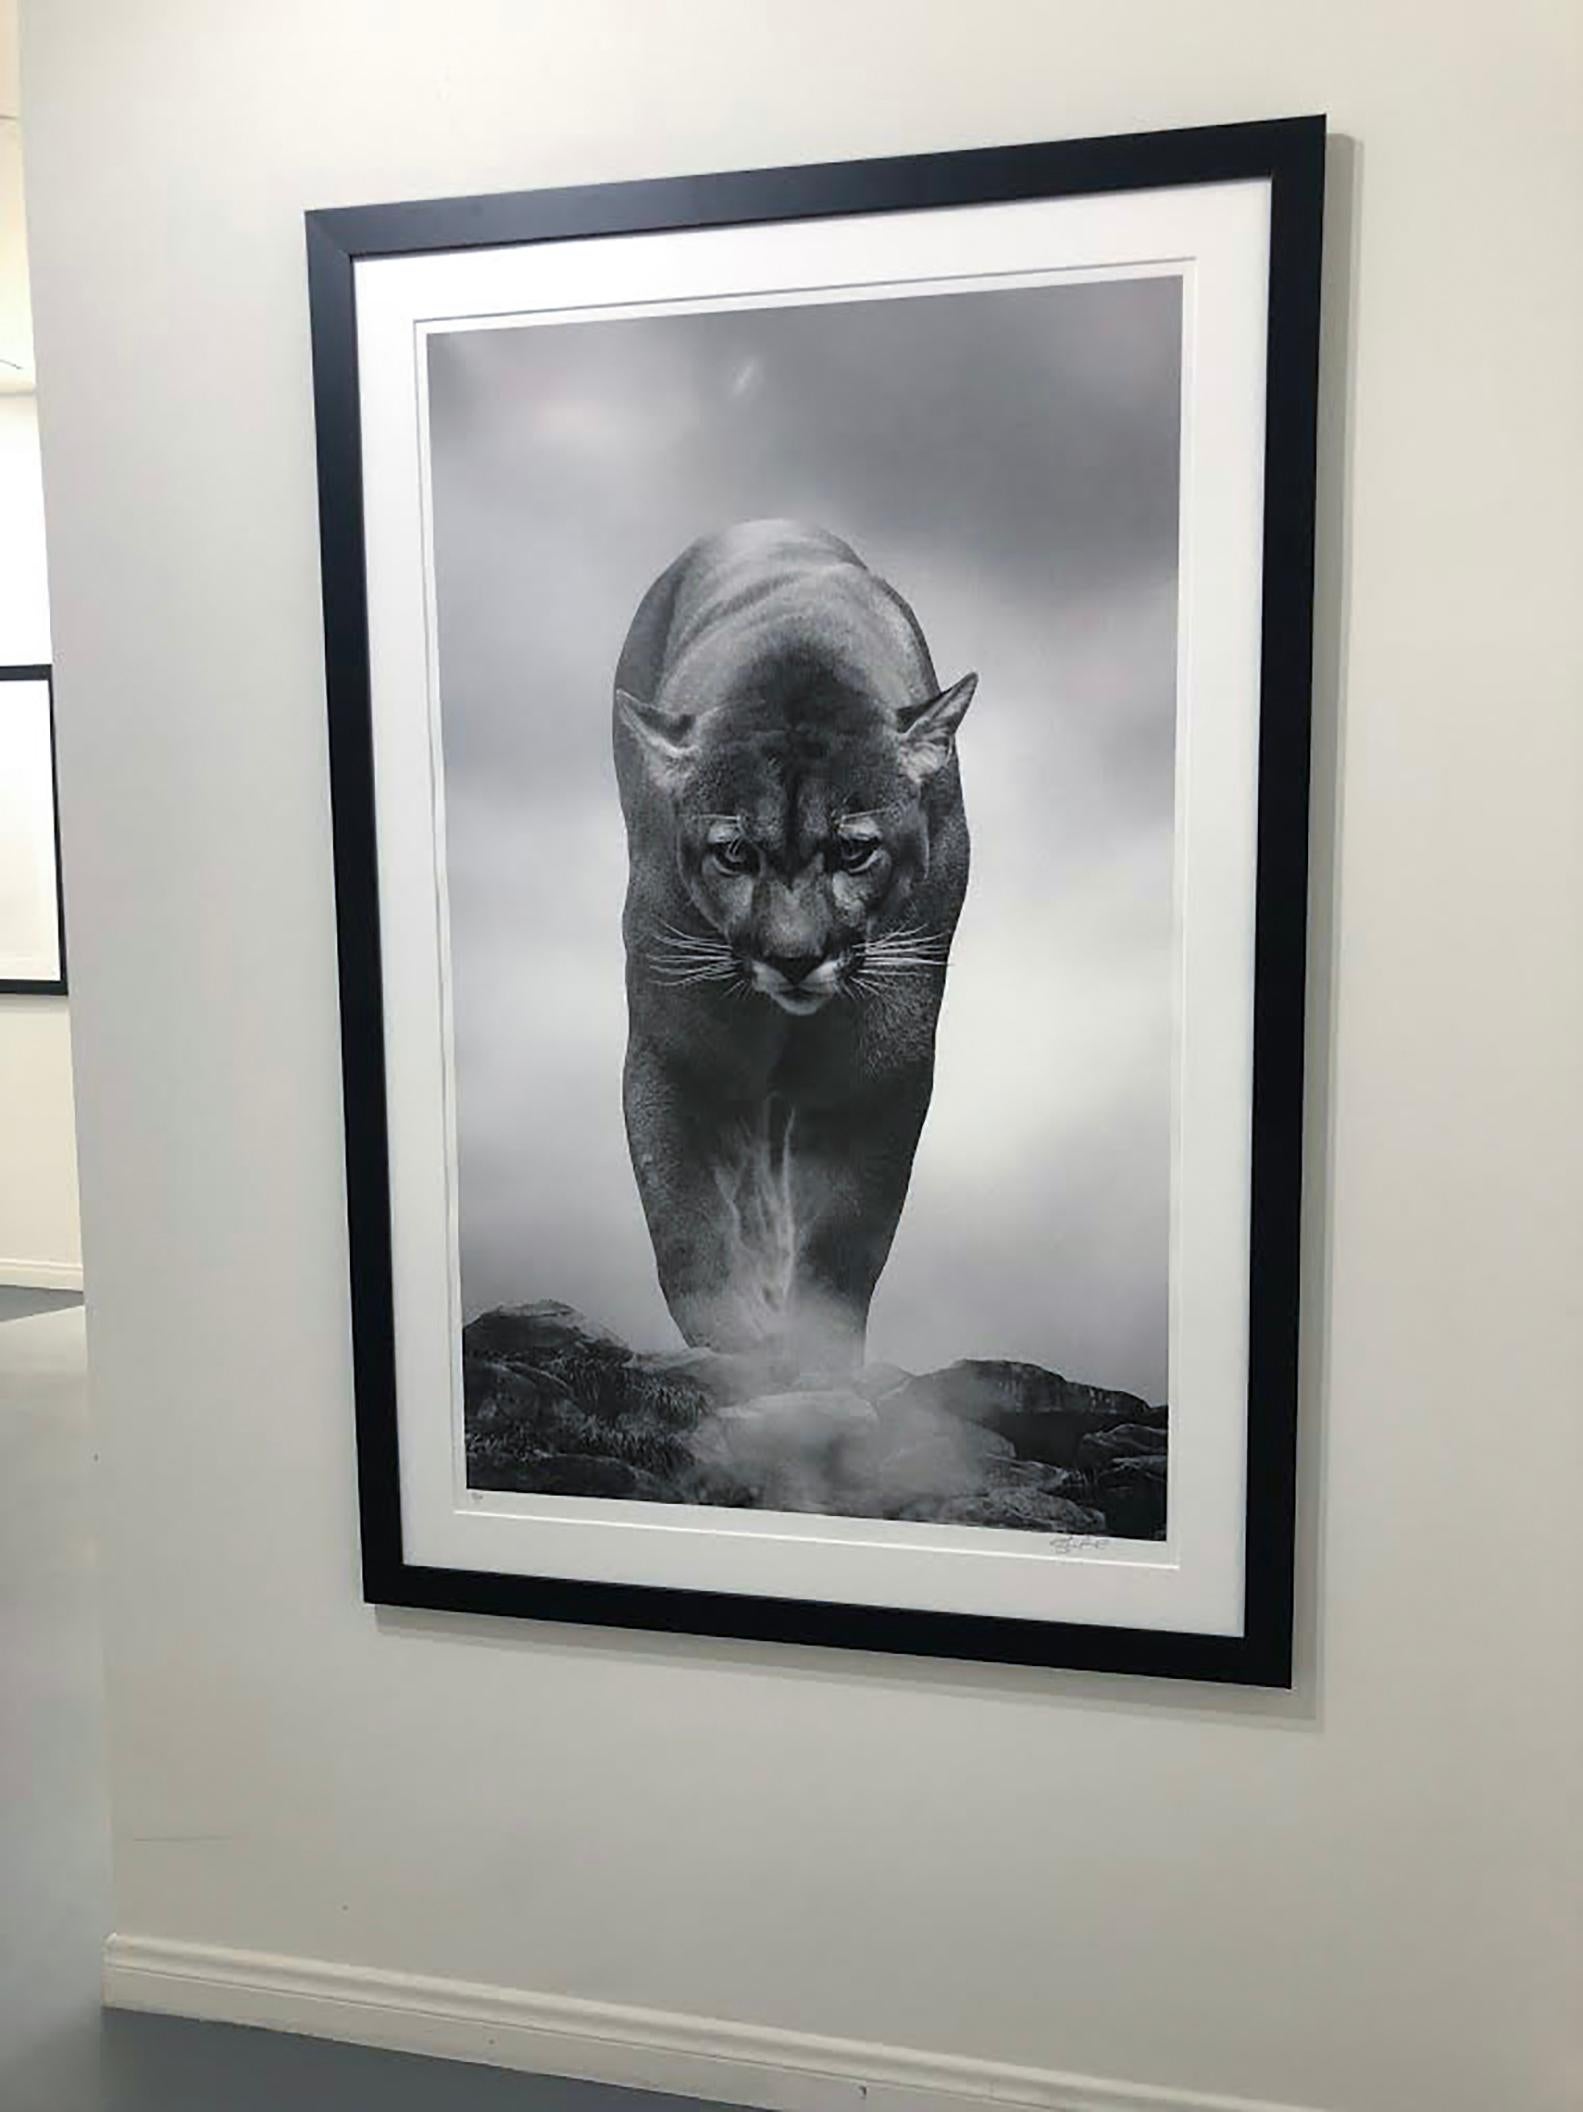 King of the Mountain - 36x48 Contemporary Black and White Photography, Cougar - Gray Landscape Photograph by Shane Russeck